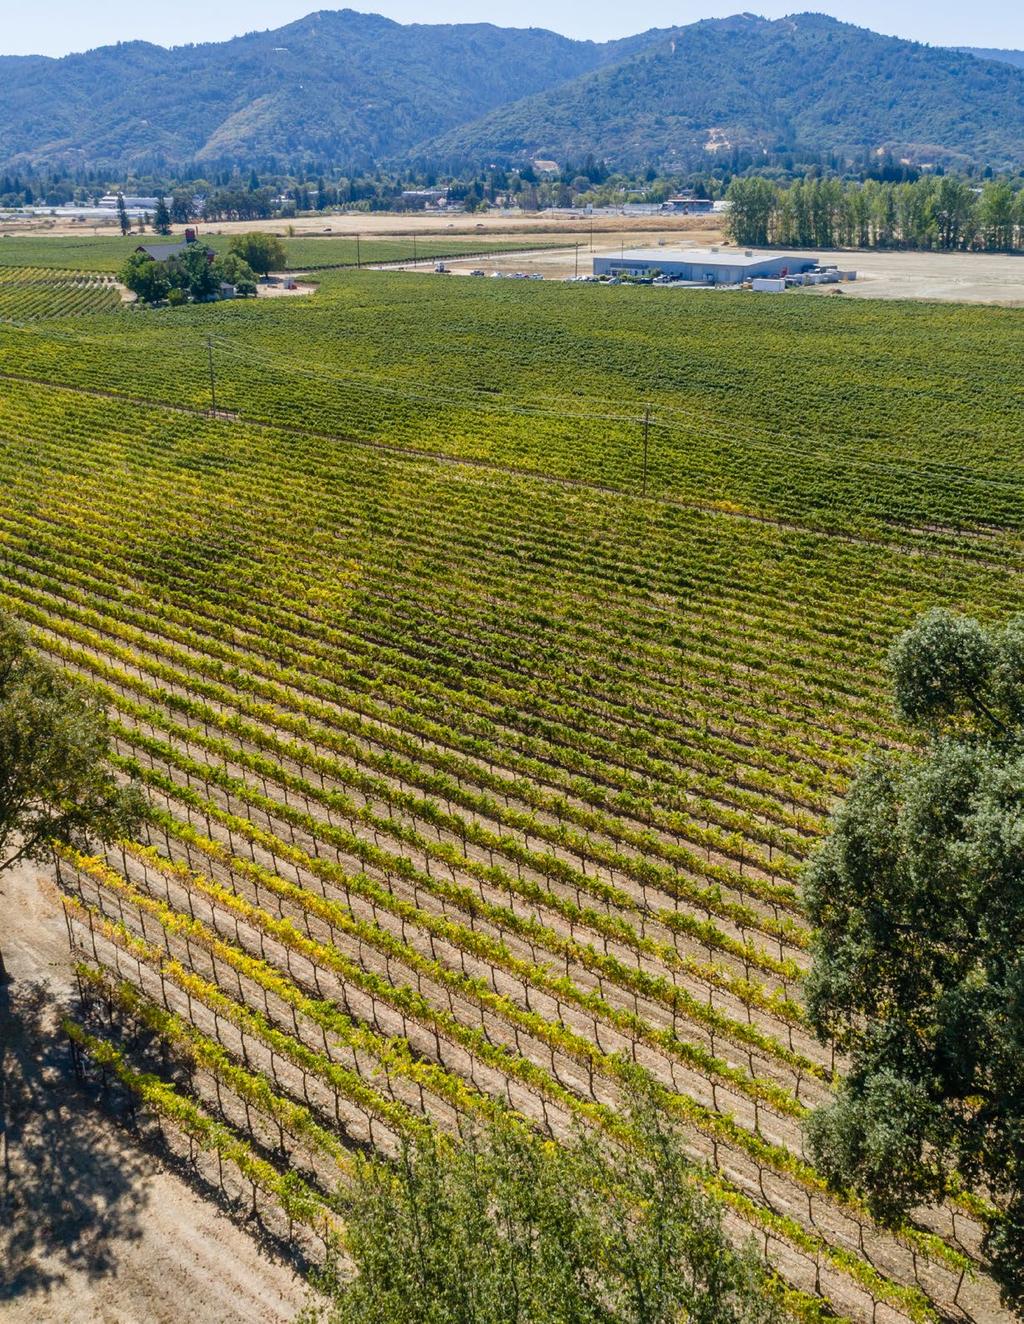 Salient Facts Address County/Appellation Winery Site 700 Ford Road, Ukiah, CA Mendocino Approximately 25+/- acres Industrial in the opportunity zone, ideal for a winery AP# s 170-200-15, 170-210-08